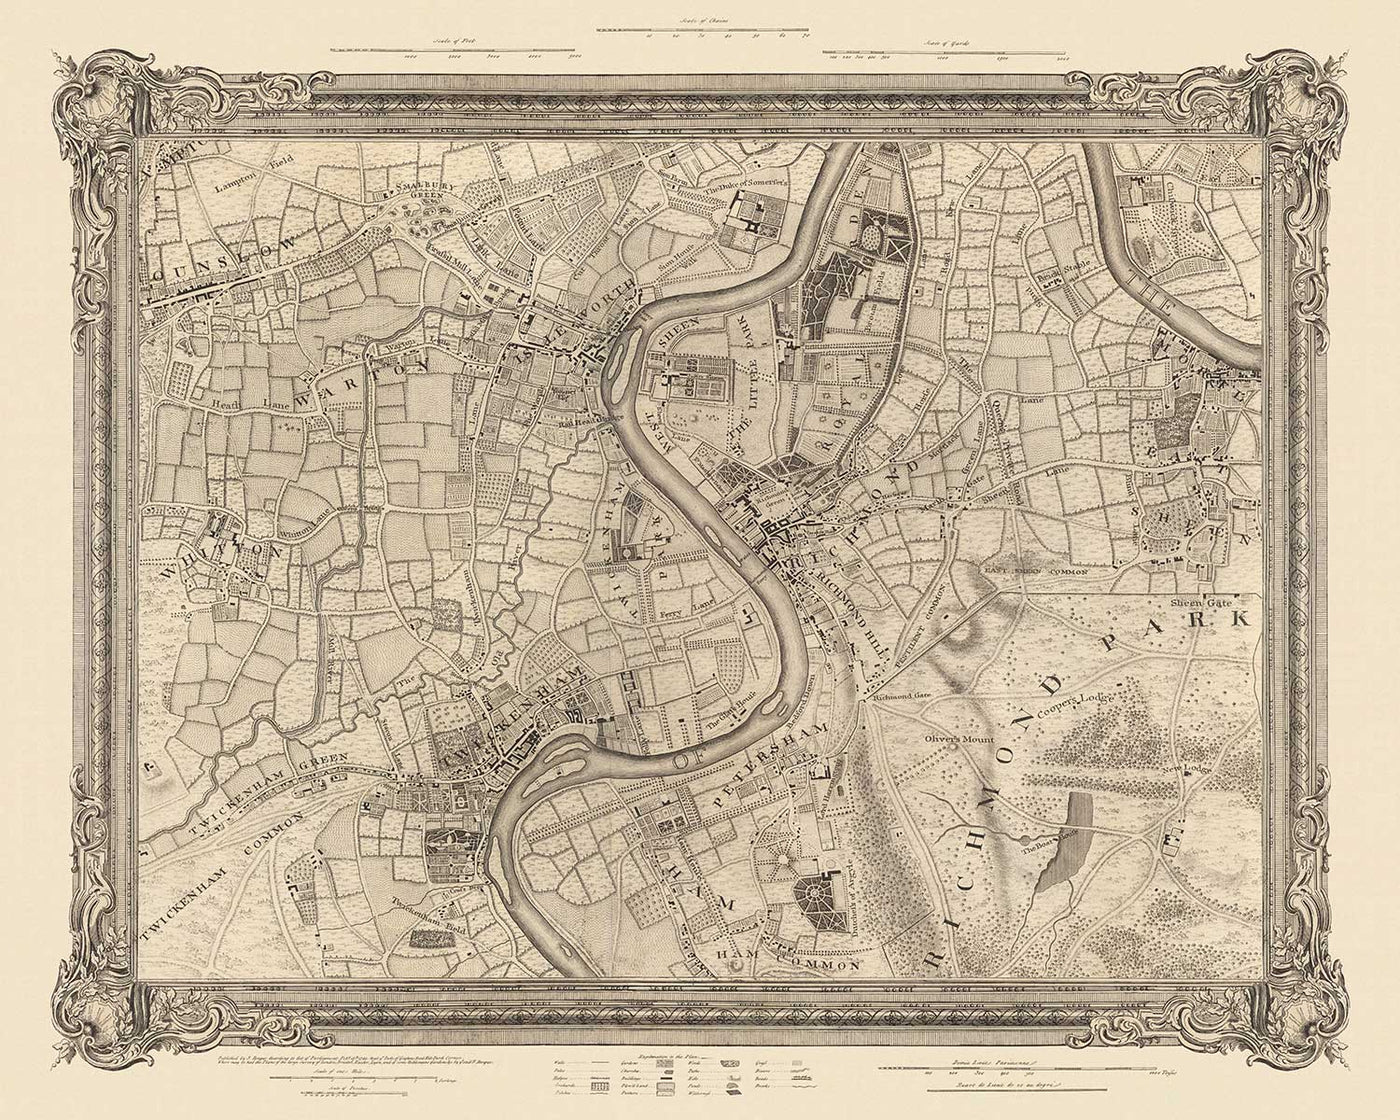 Old Map of South West London in 1746 by John Rocque - Twickenham, Isleworth, Richmond Park, Hounslow, Whitton, SW14, TW1, TW2, TW4